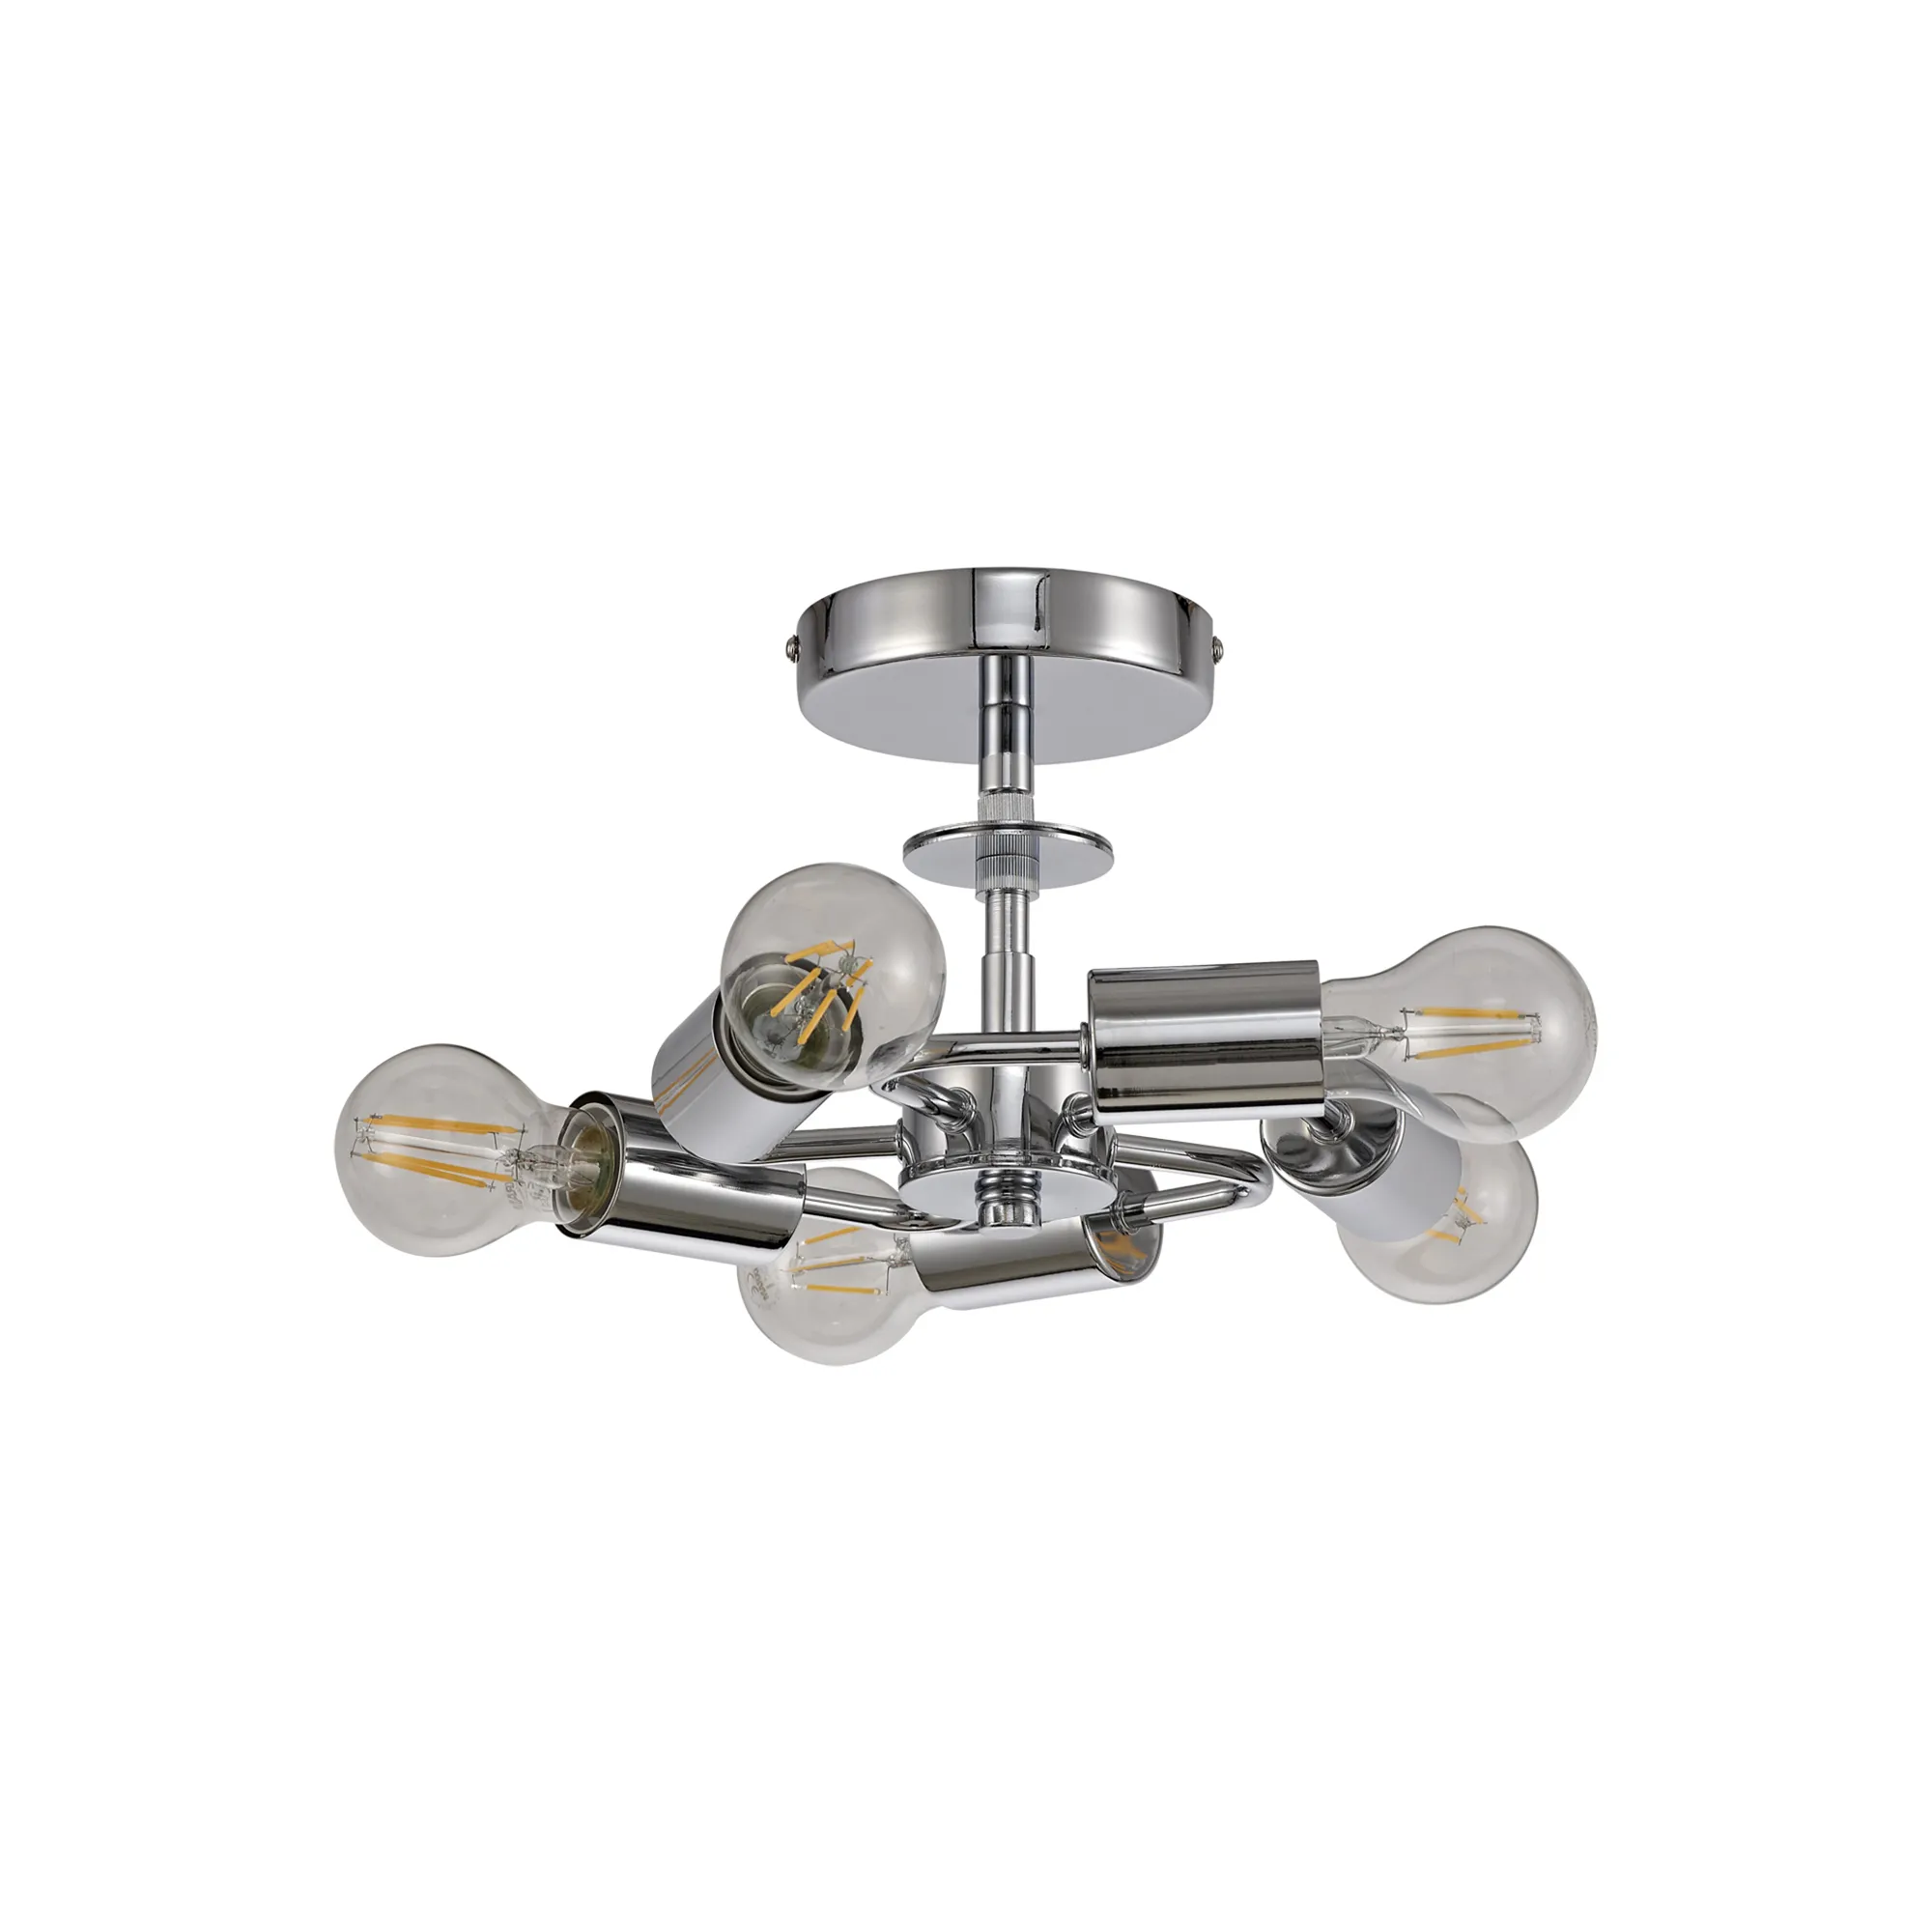 Baymont 60cm, Drop Flush 5 Light Polished Chrome, Ivory Pearl/White, Frosted Diffuser DK0489  Deco Baymont CH IV